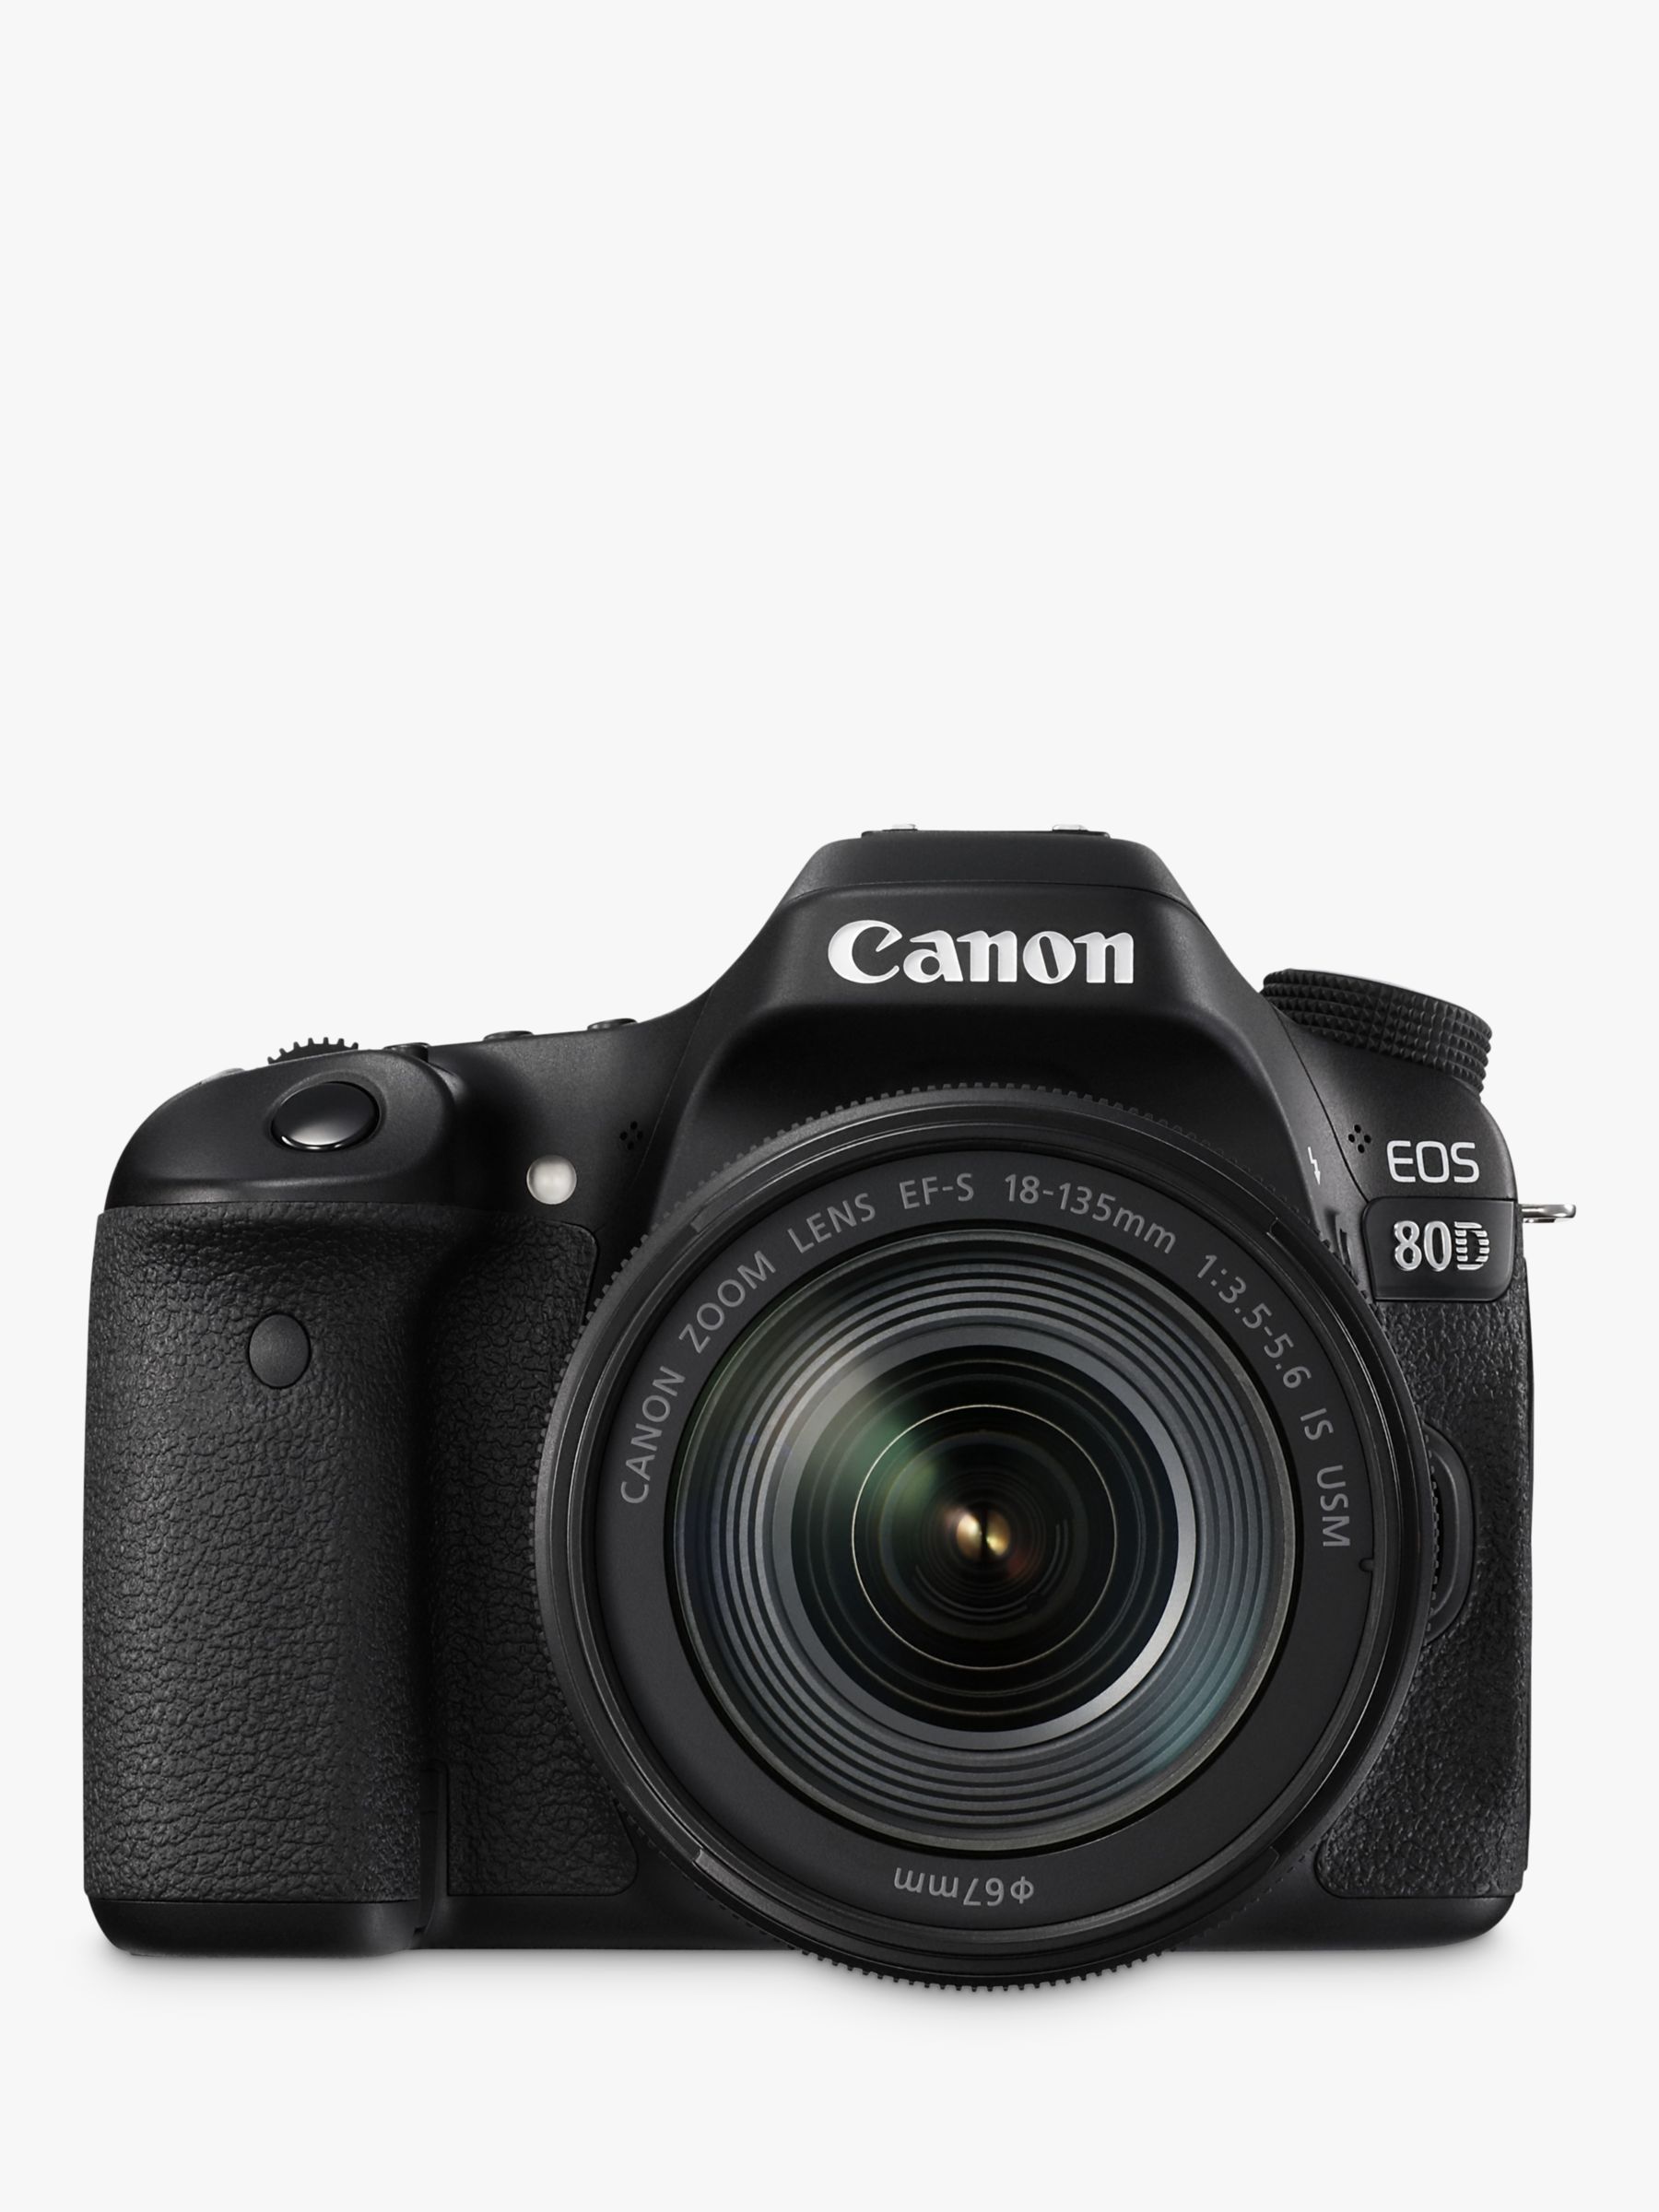 Canon EOS 80D Digital SLR Camera With 18-135mm Lens, HD 1080p, 24.2MP, Wi-Fi, NFC, 3 Vari-Angle Touchscreen